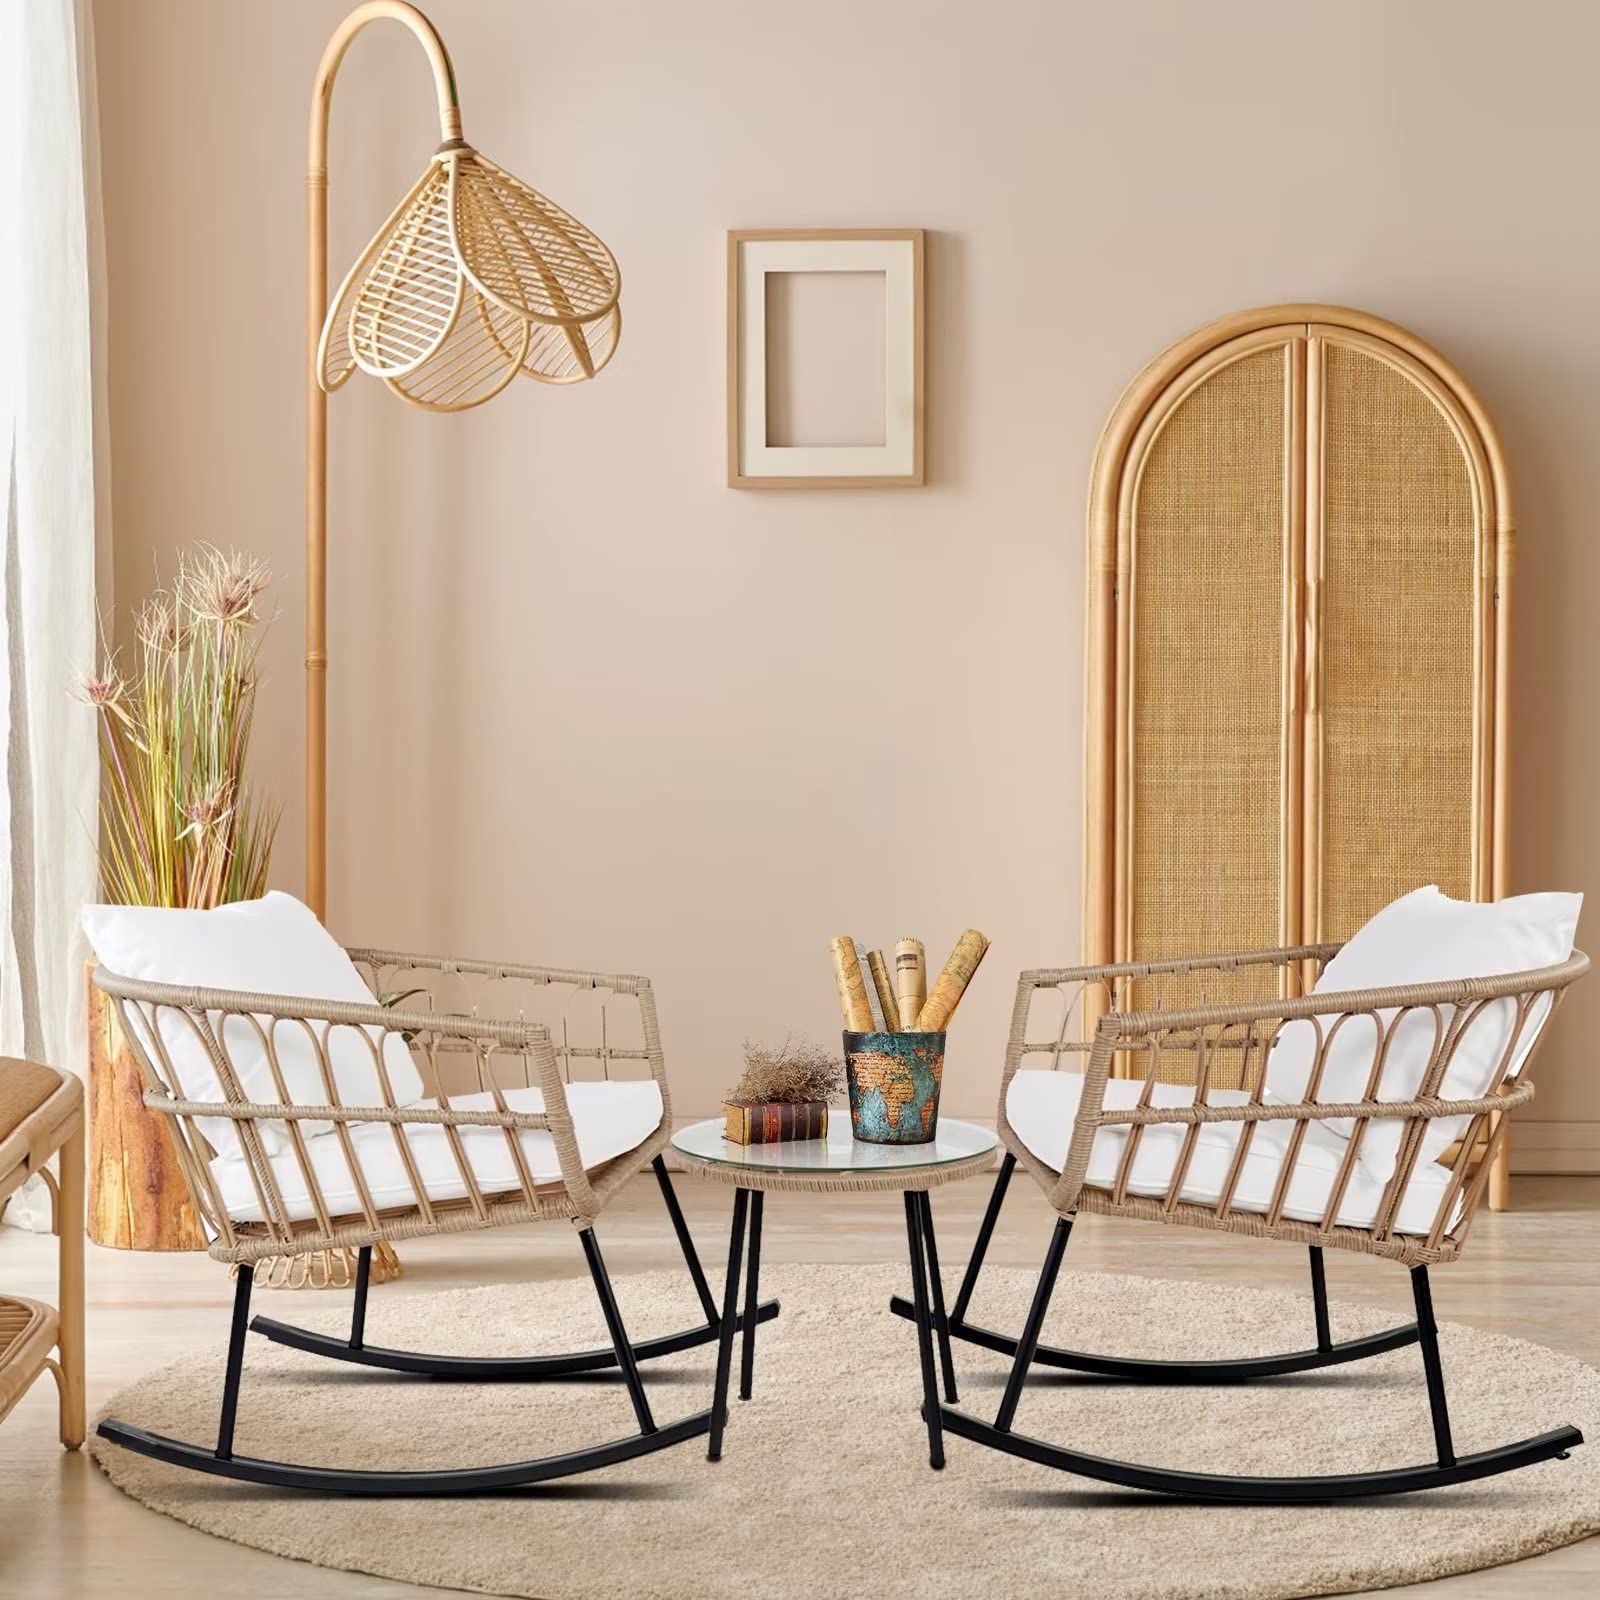 Most Up To Date Amazon: 3 Pieces Rocking Chairs Set, Boho Indoor Outdoor All Weather  Woven Rope Table Set, Tan Wicker Chat Set With White Cushions, Rattan Sets  For Balcony, Garden, Front Porch,indoor,living Rooms : Patio, Throughout 3 Piece Outdoor Boho Wicker Chat Set (View 6 of 15)